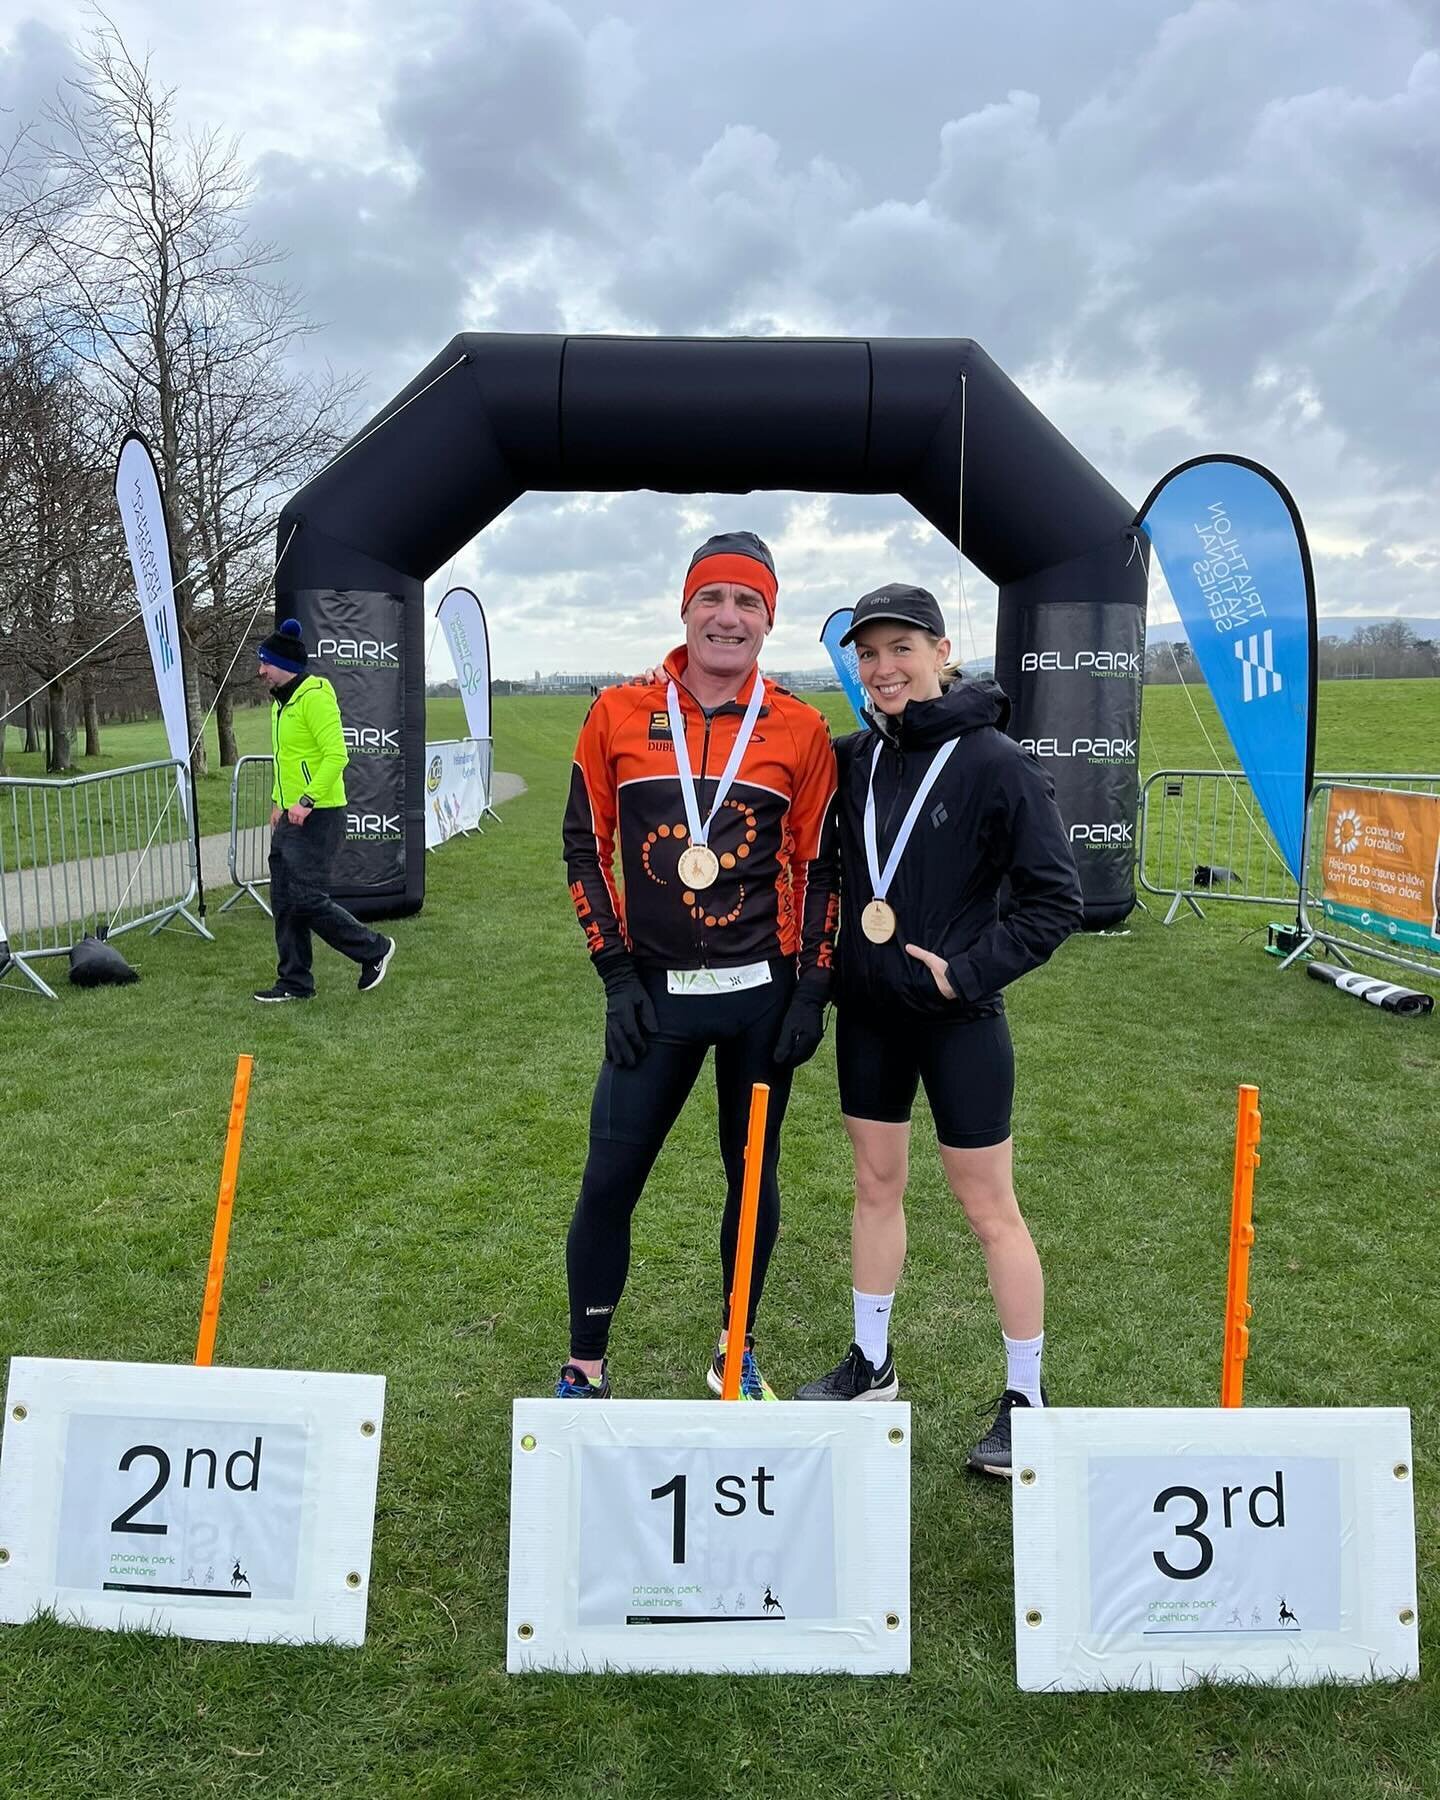 What a weekend! 3D members kicking of their season yesterday with the Phoenix Park duathlon, hosted by @belparktri. We had some amazing results and performances - our head Coach Sean Farrell came 1st in his AG, young star Ellen Hynes also came 1st in